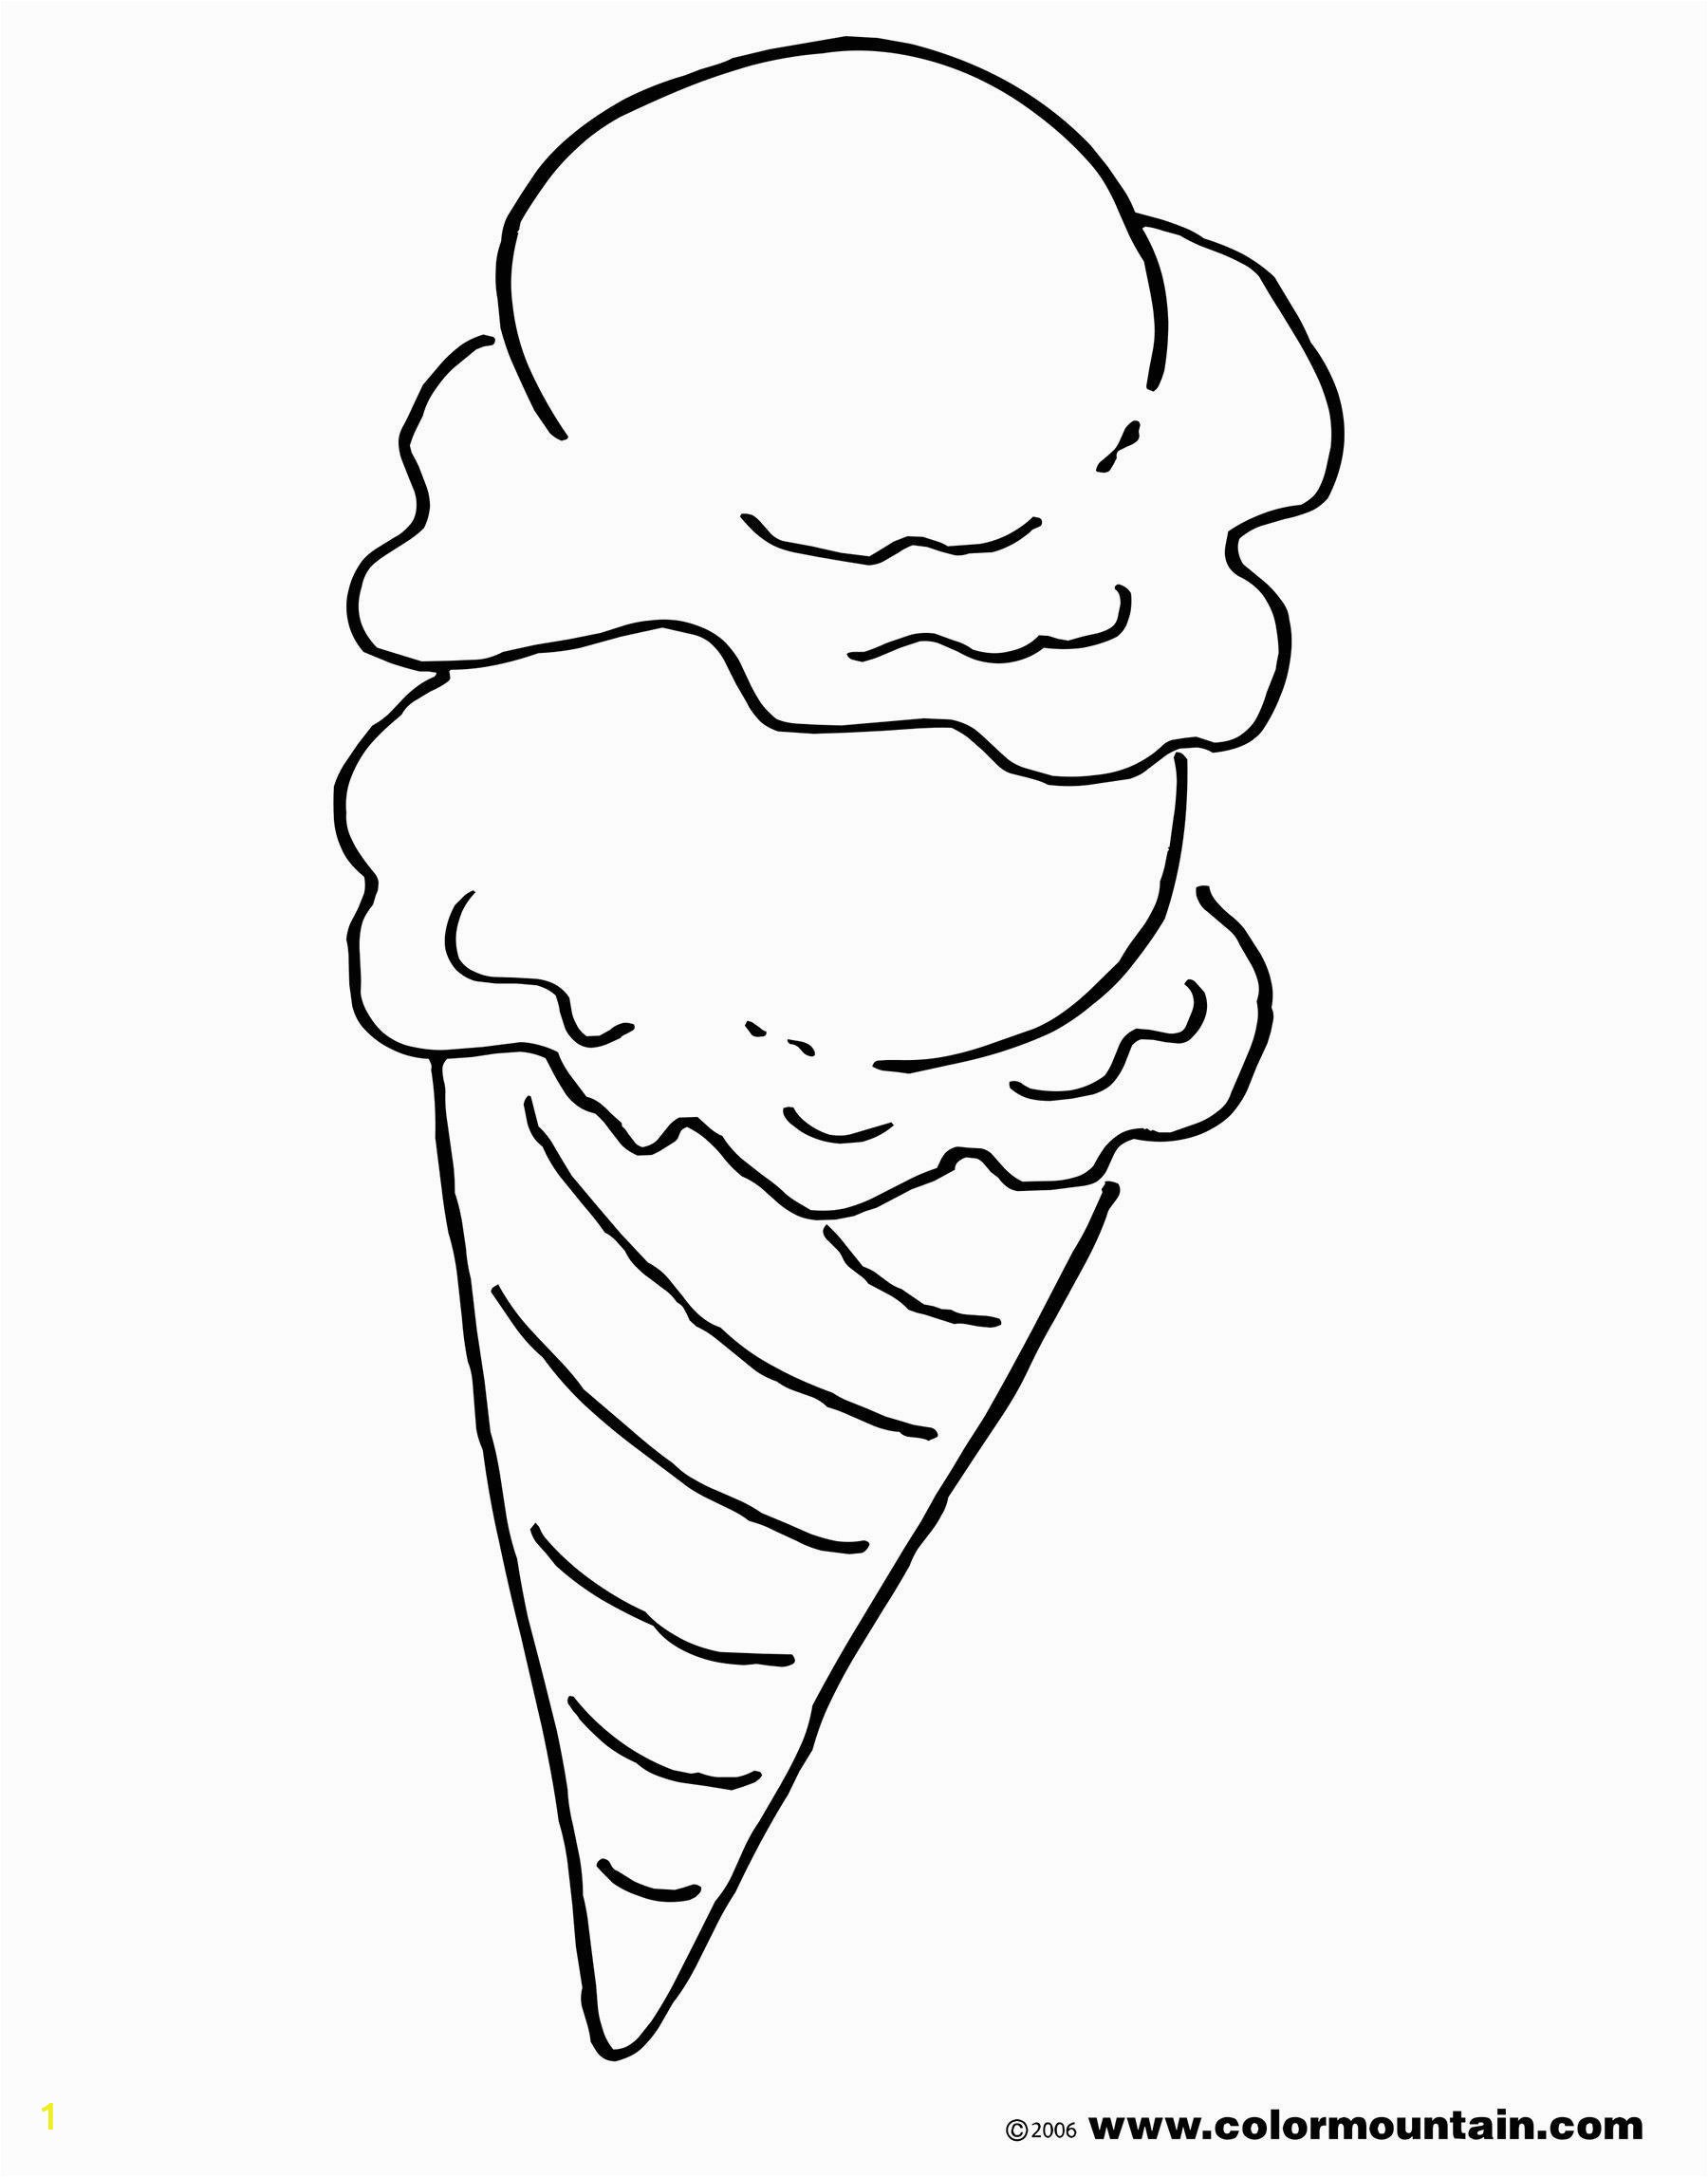 Printable Coloring Pages Ice Cream New Ice Cream Colouring Pages Coloring Coloringpages